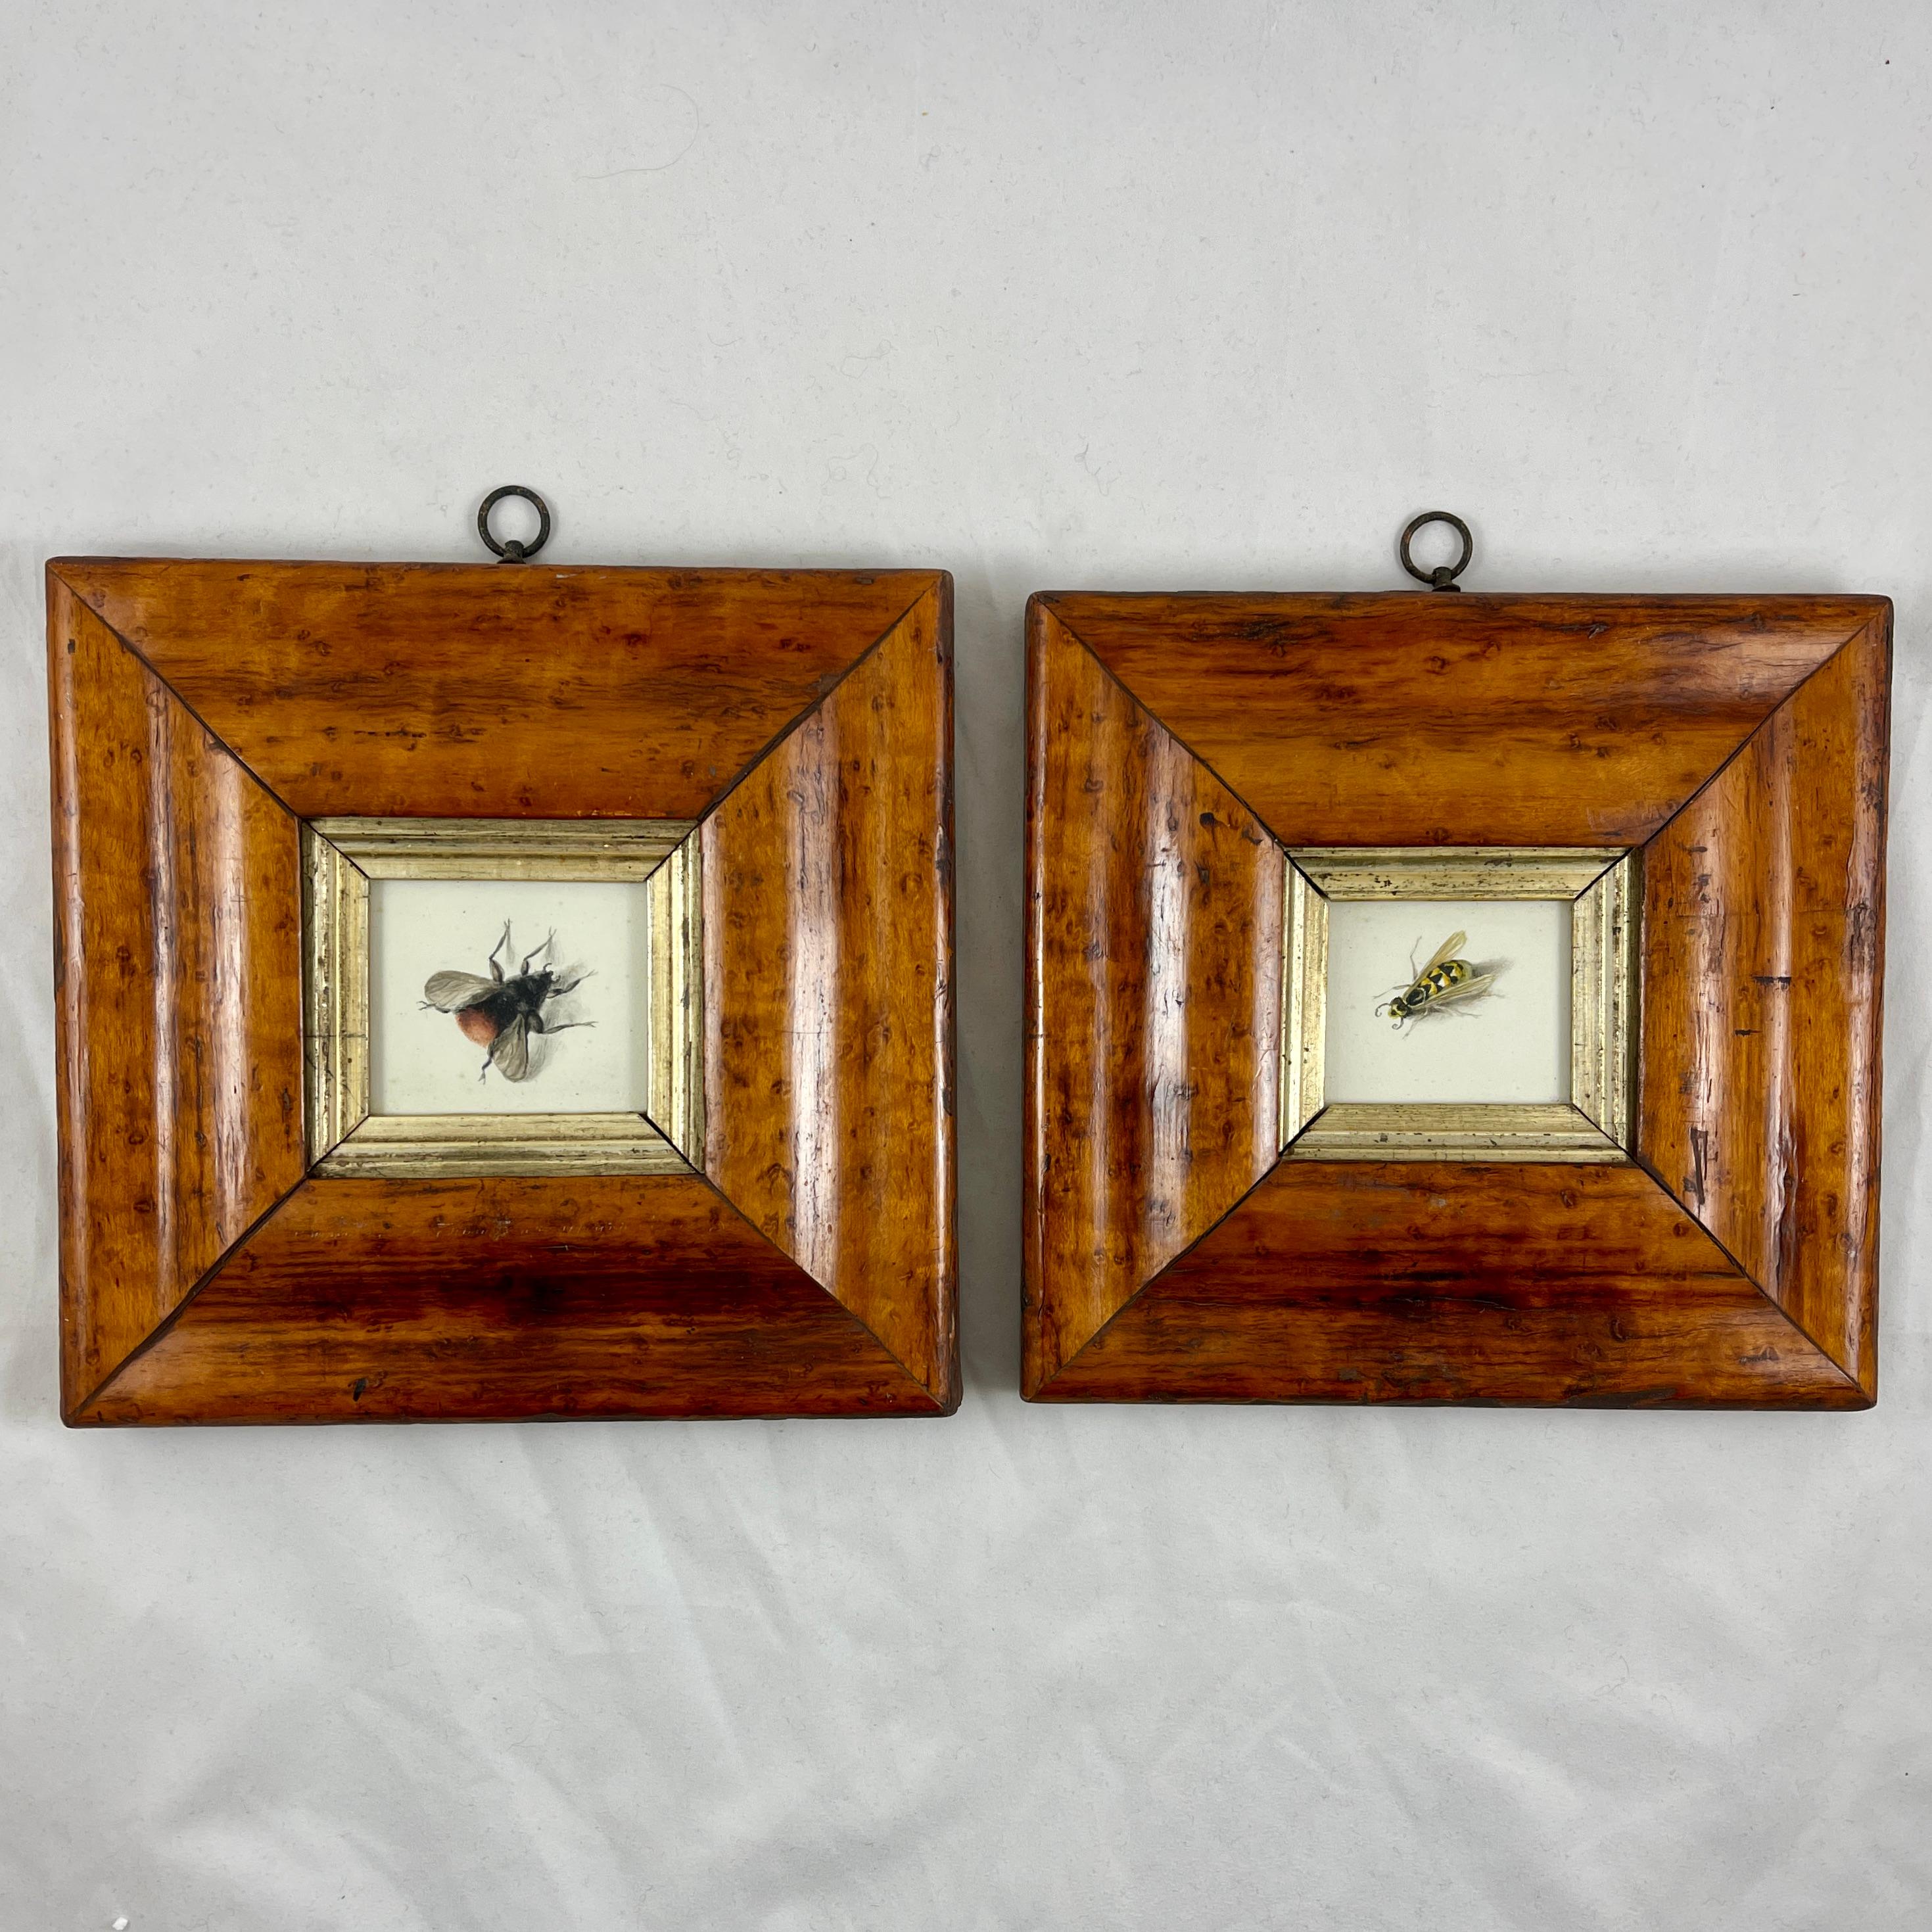 English Regency Period Original Watercolor Fruitwood Frame, a Bumble Bee Study  10